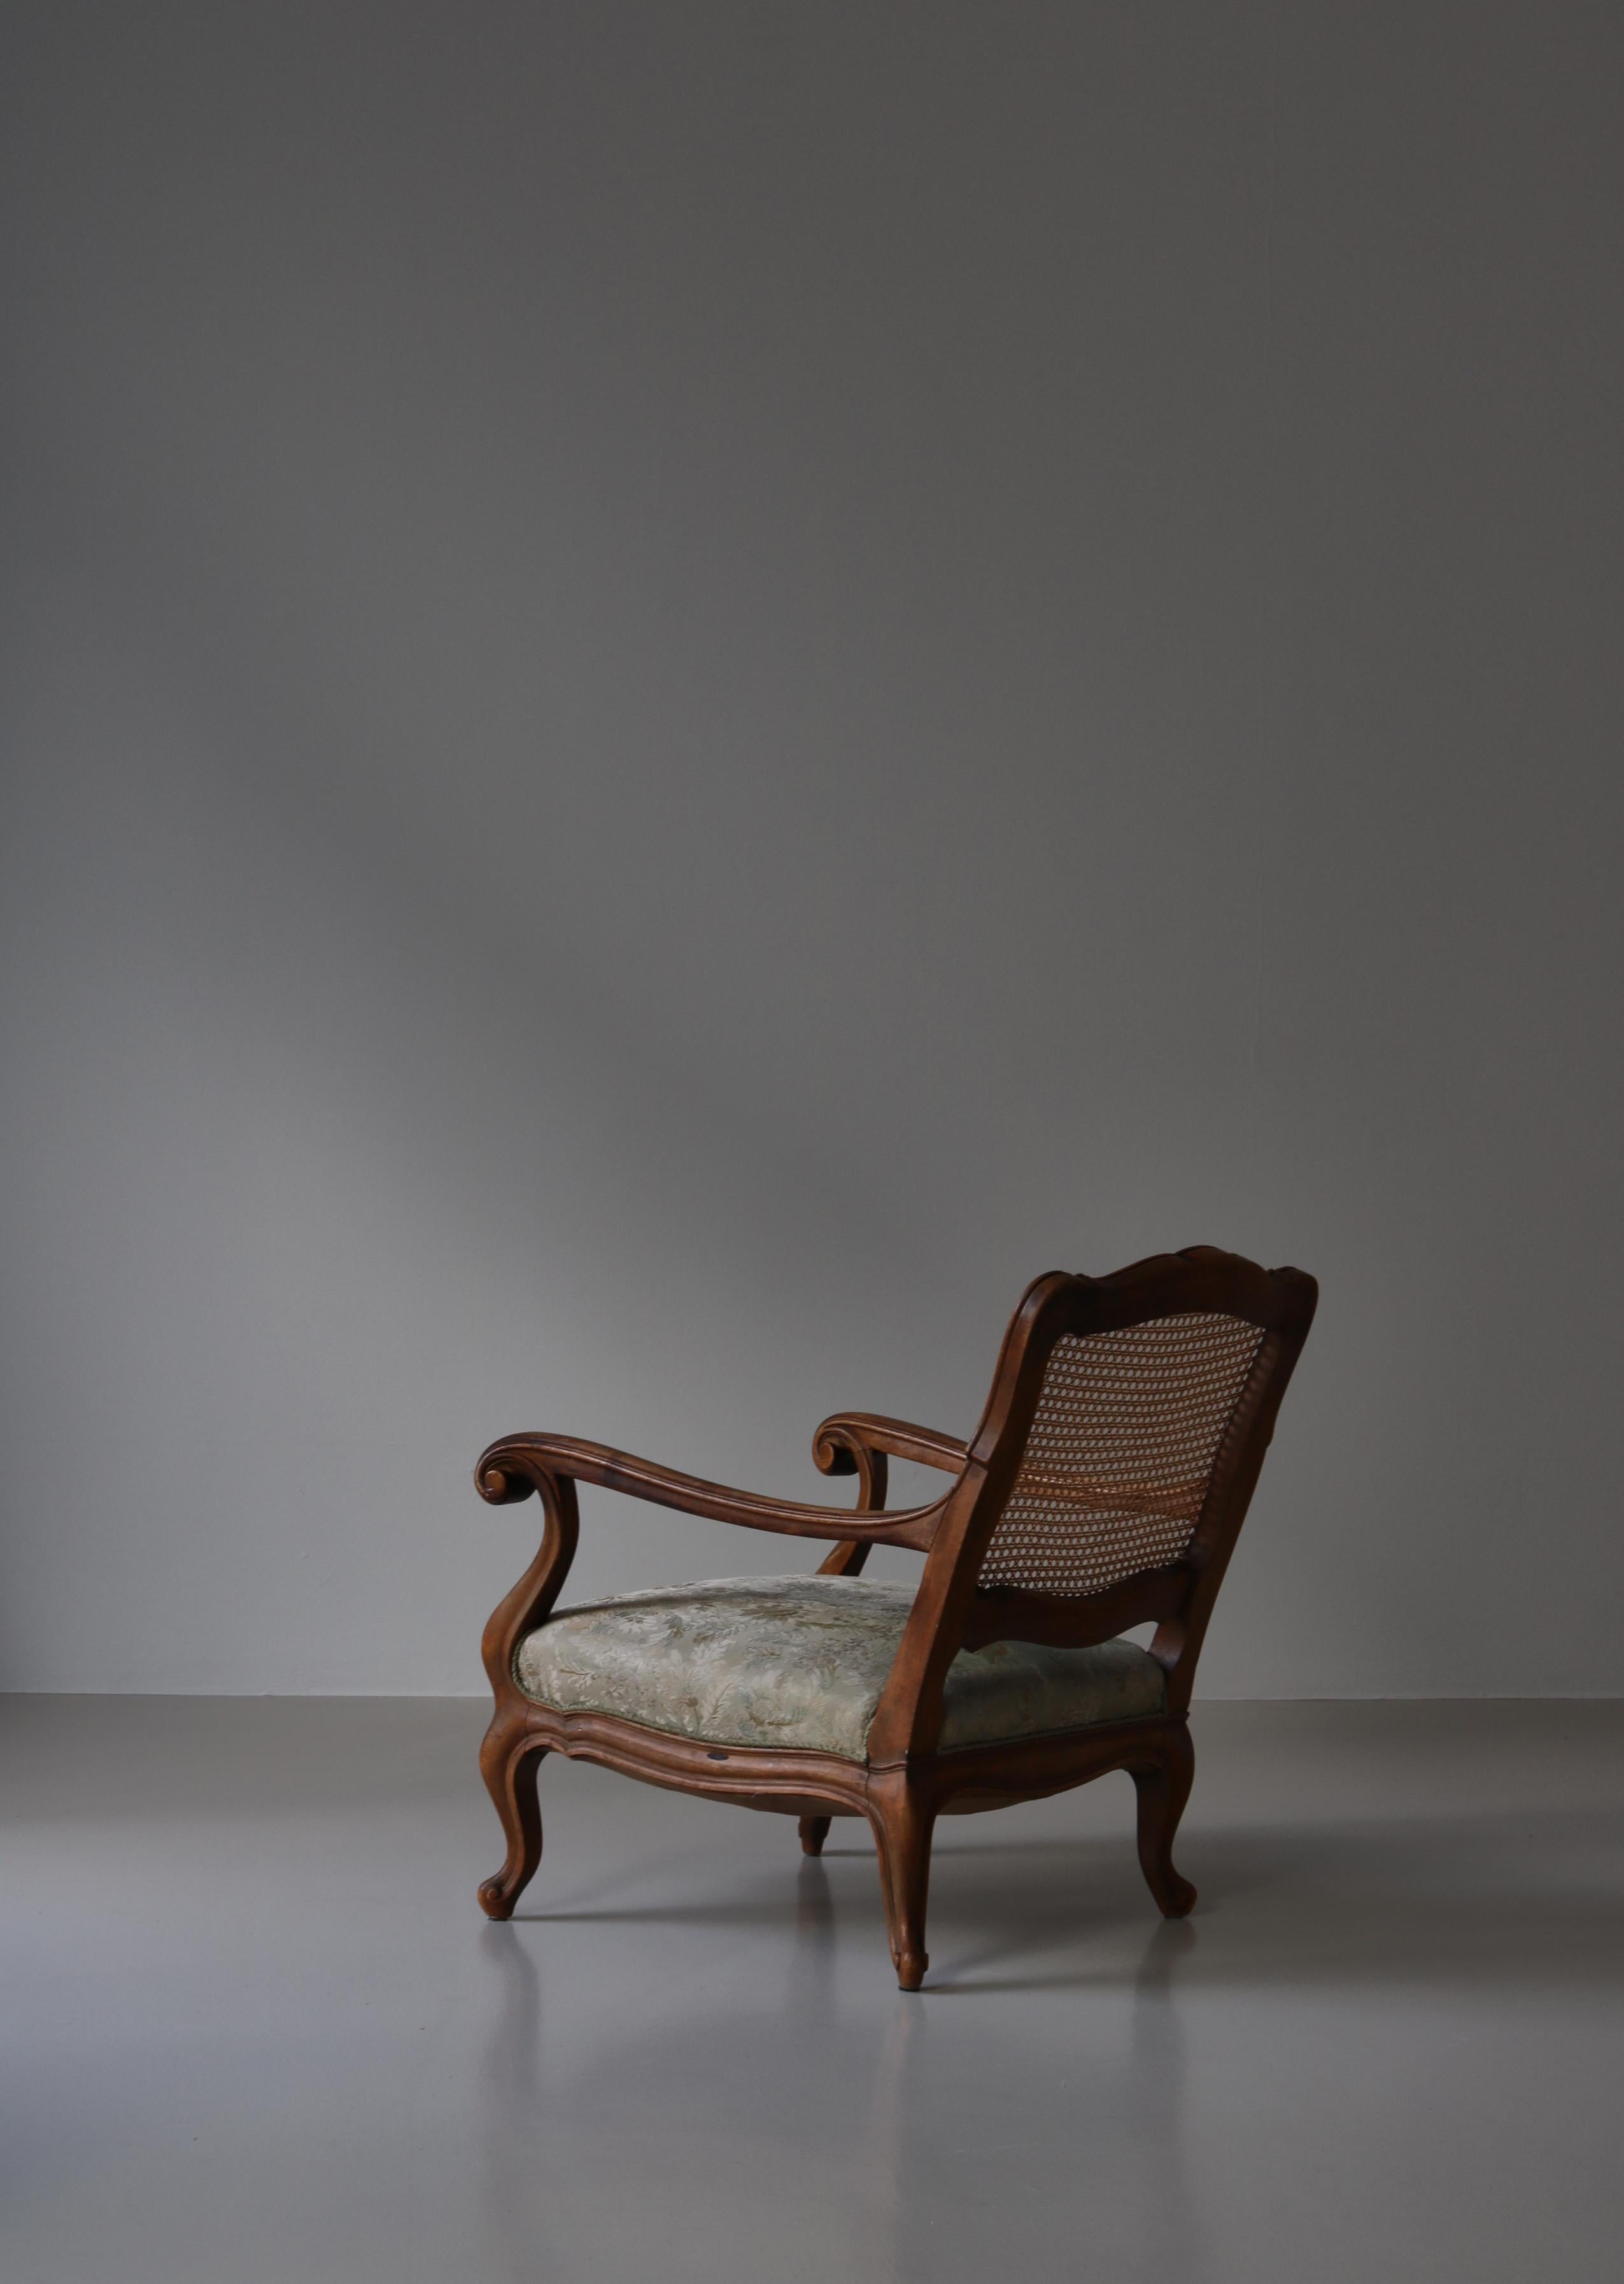 Nutwood Bergére Chair Rococo Revival by Danish Cabinetmaker, Early 20th Century For Sale